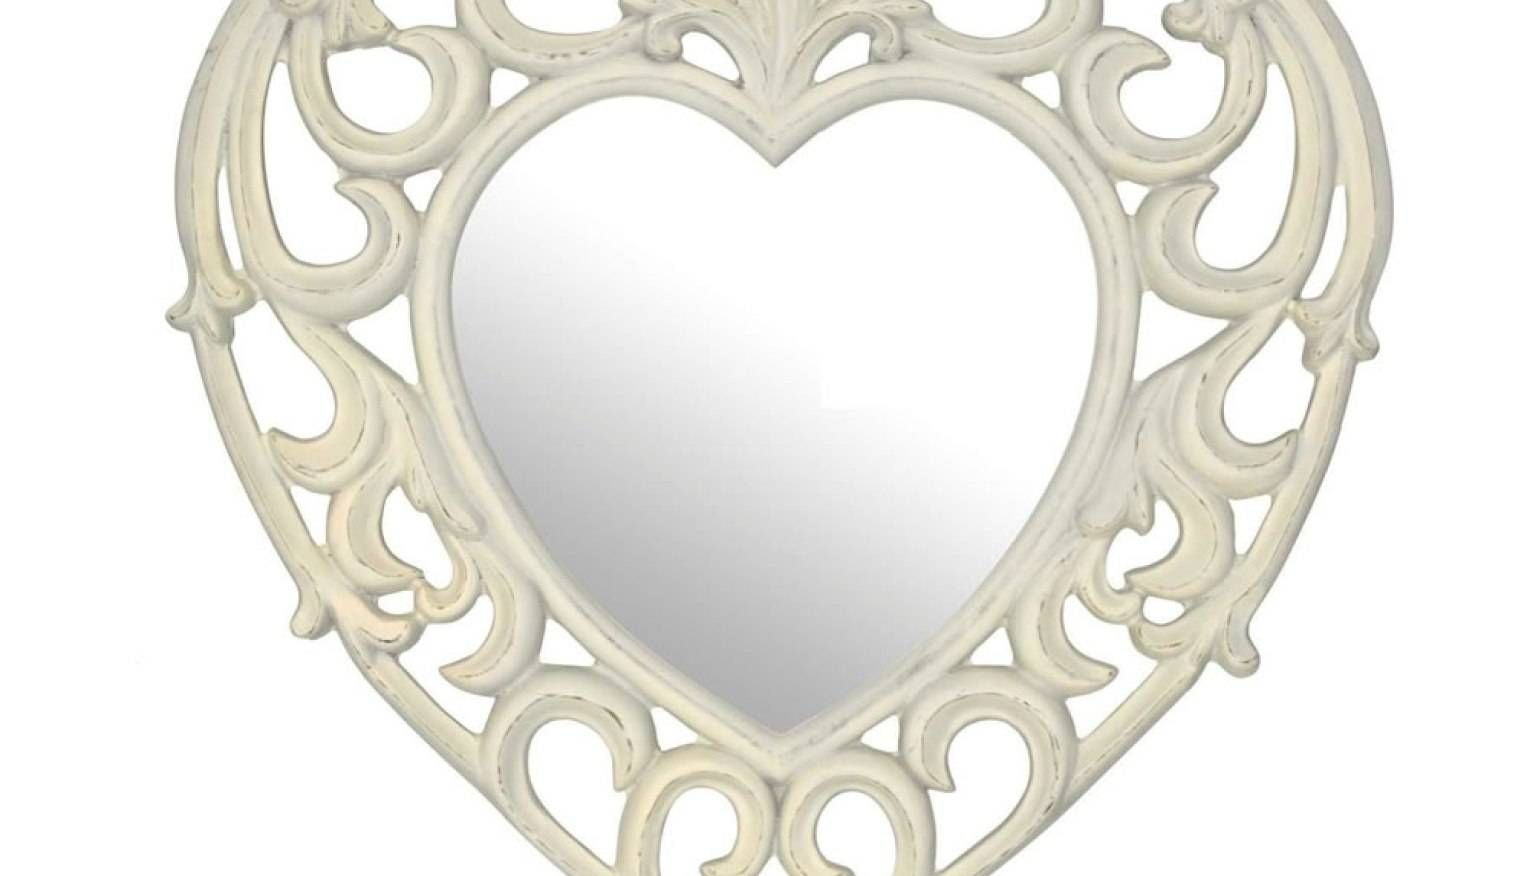 Mirror : Admirable Large Heart Shaped Mirrors For Walls Memorable For Large Heart Mirrors (View 11 of 15)